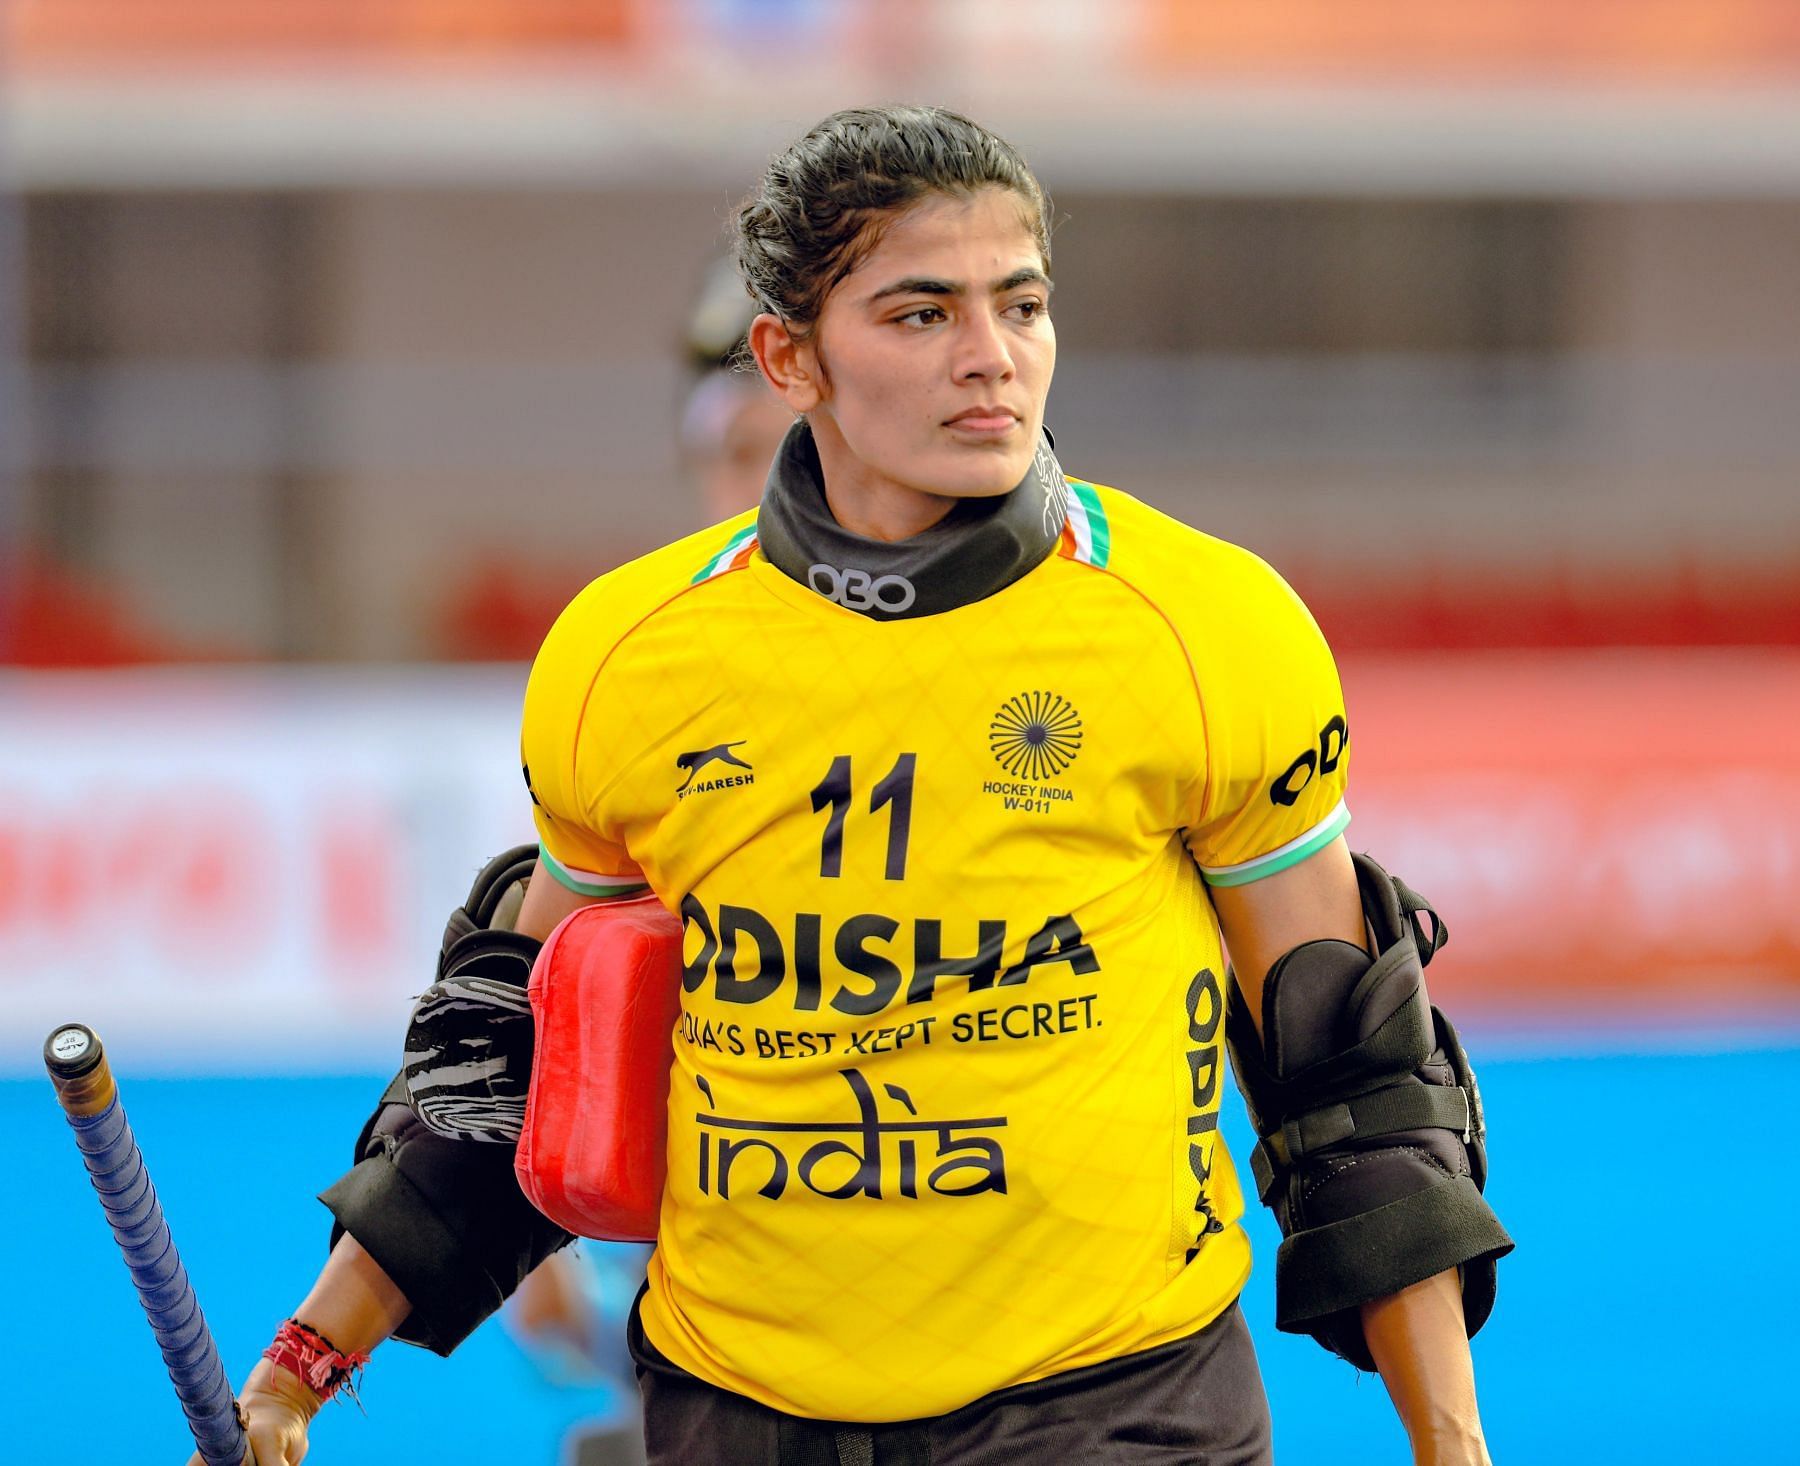 India captain and goalkeeper Savita has captained India since the Olympics and will do so in the World Cup also